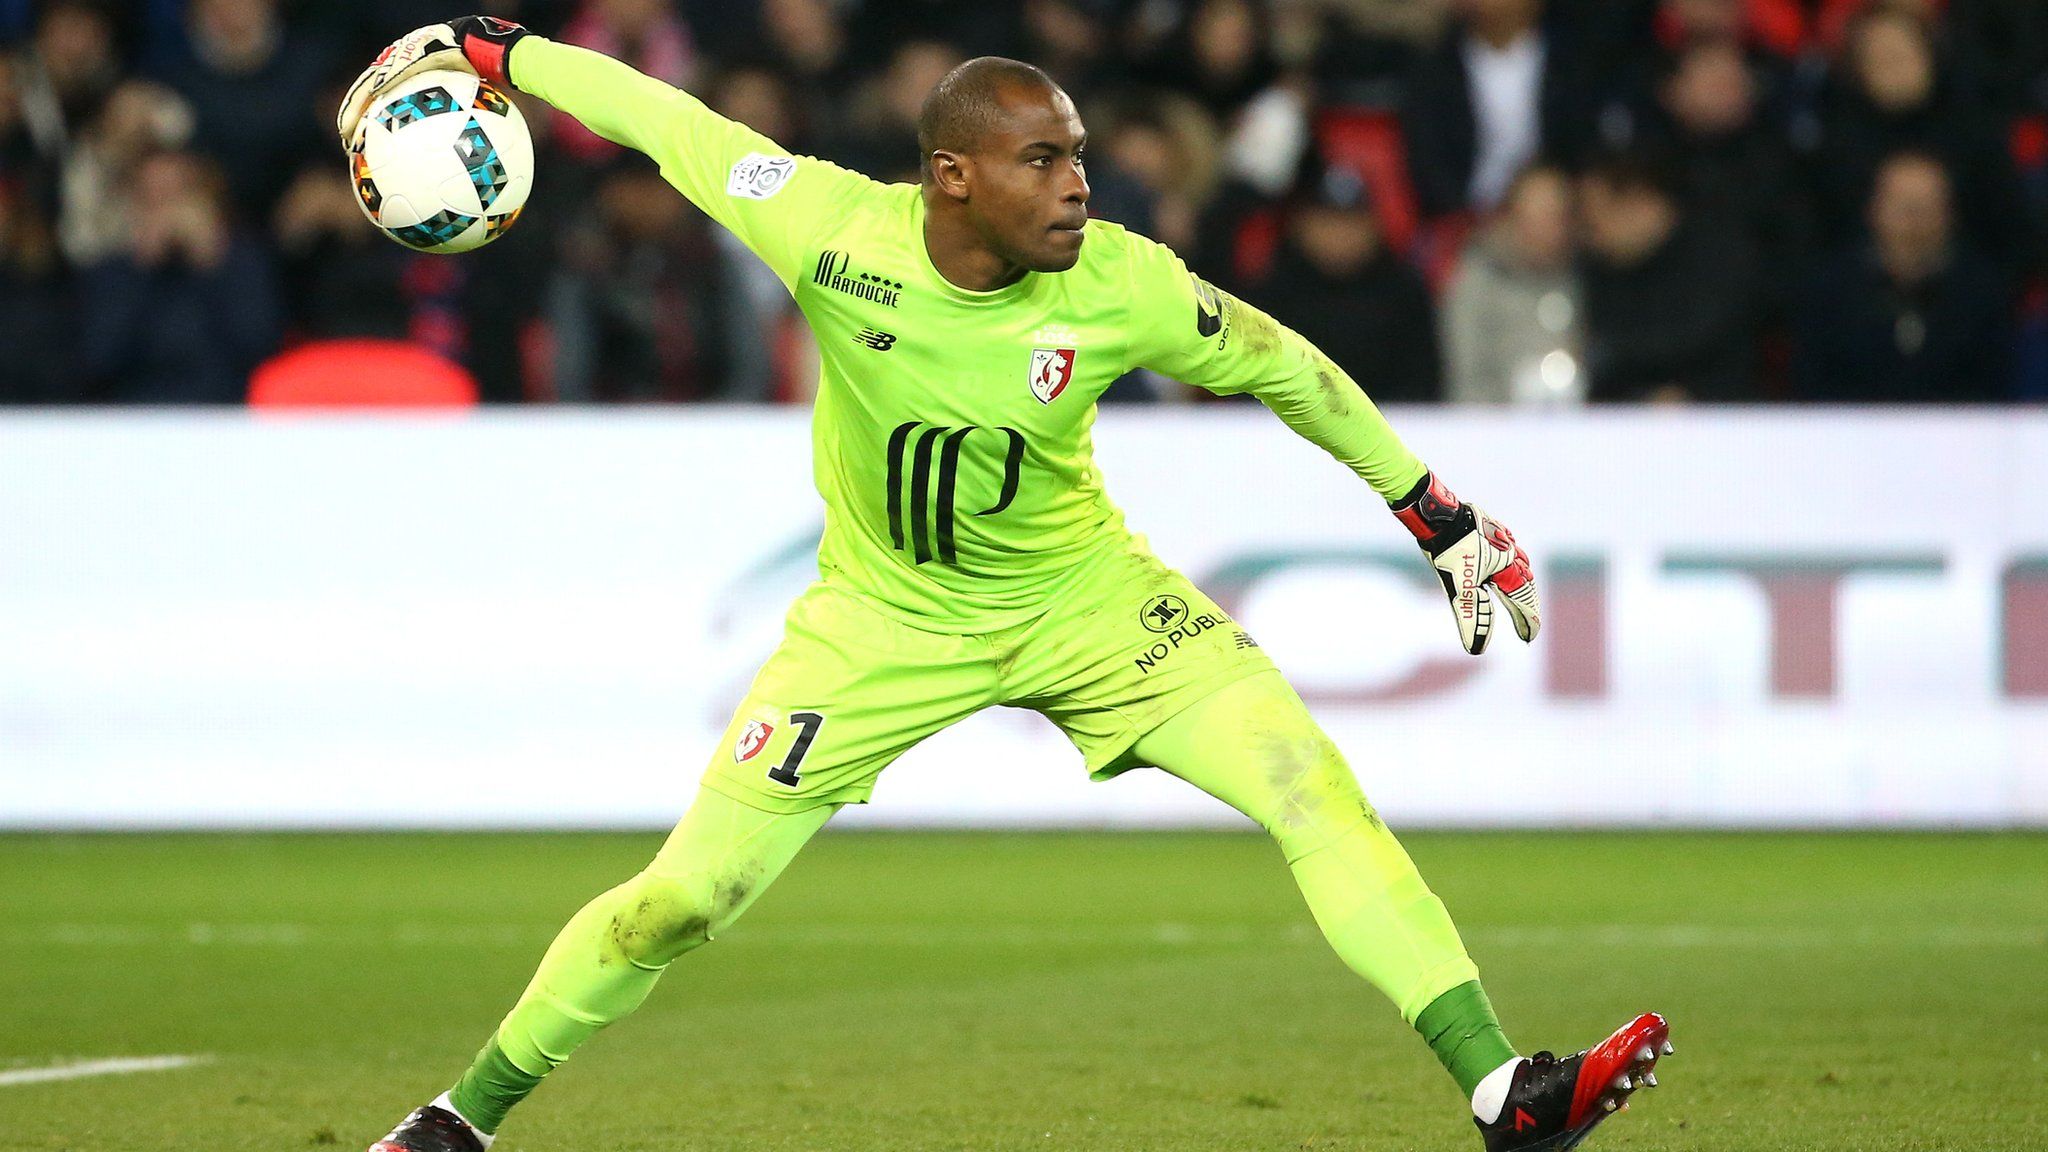 Vincent Enyeama: Nigeria keeper wants to play again - BBC Sport